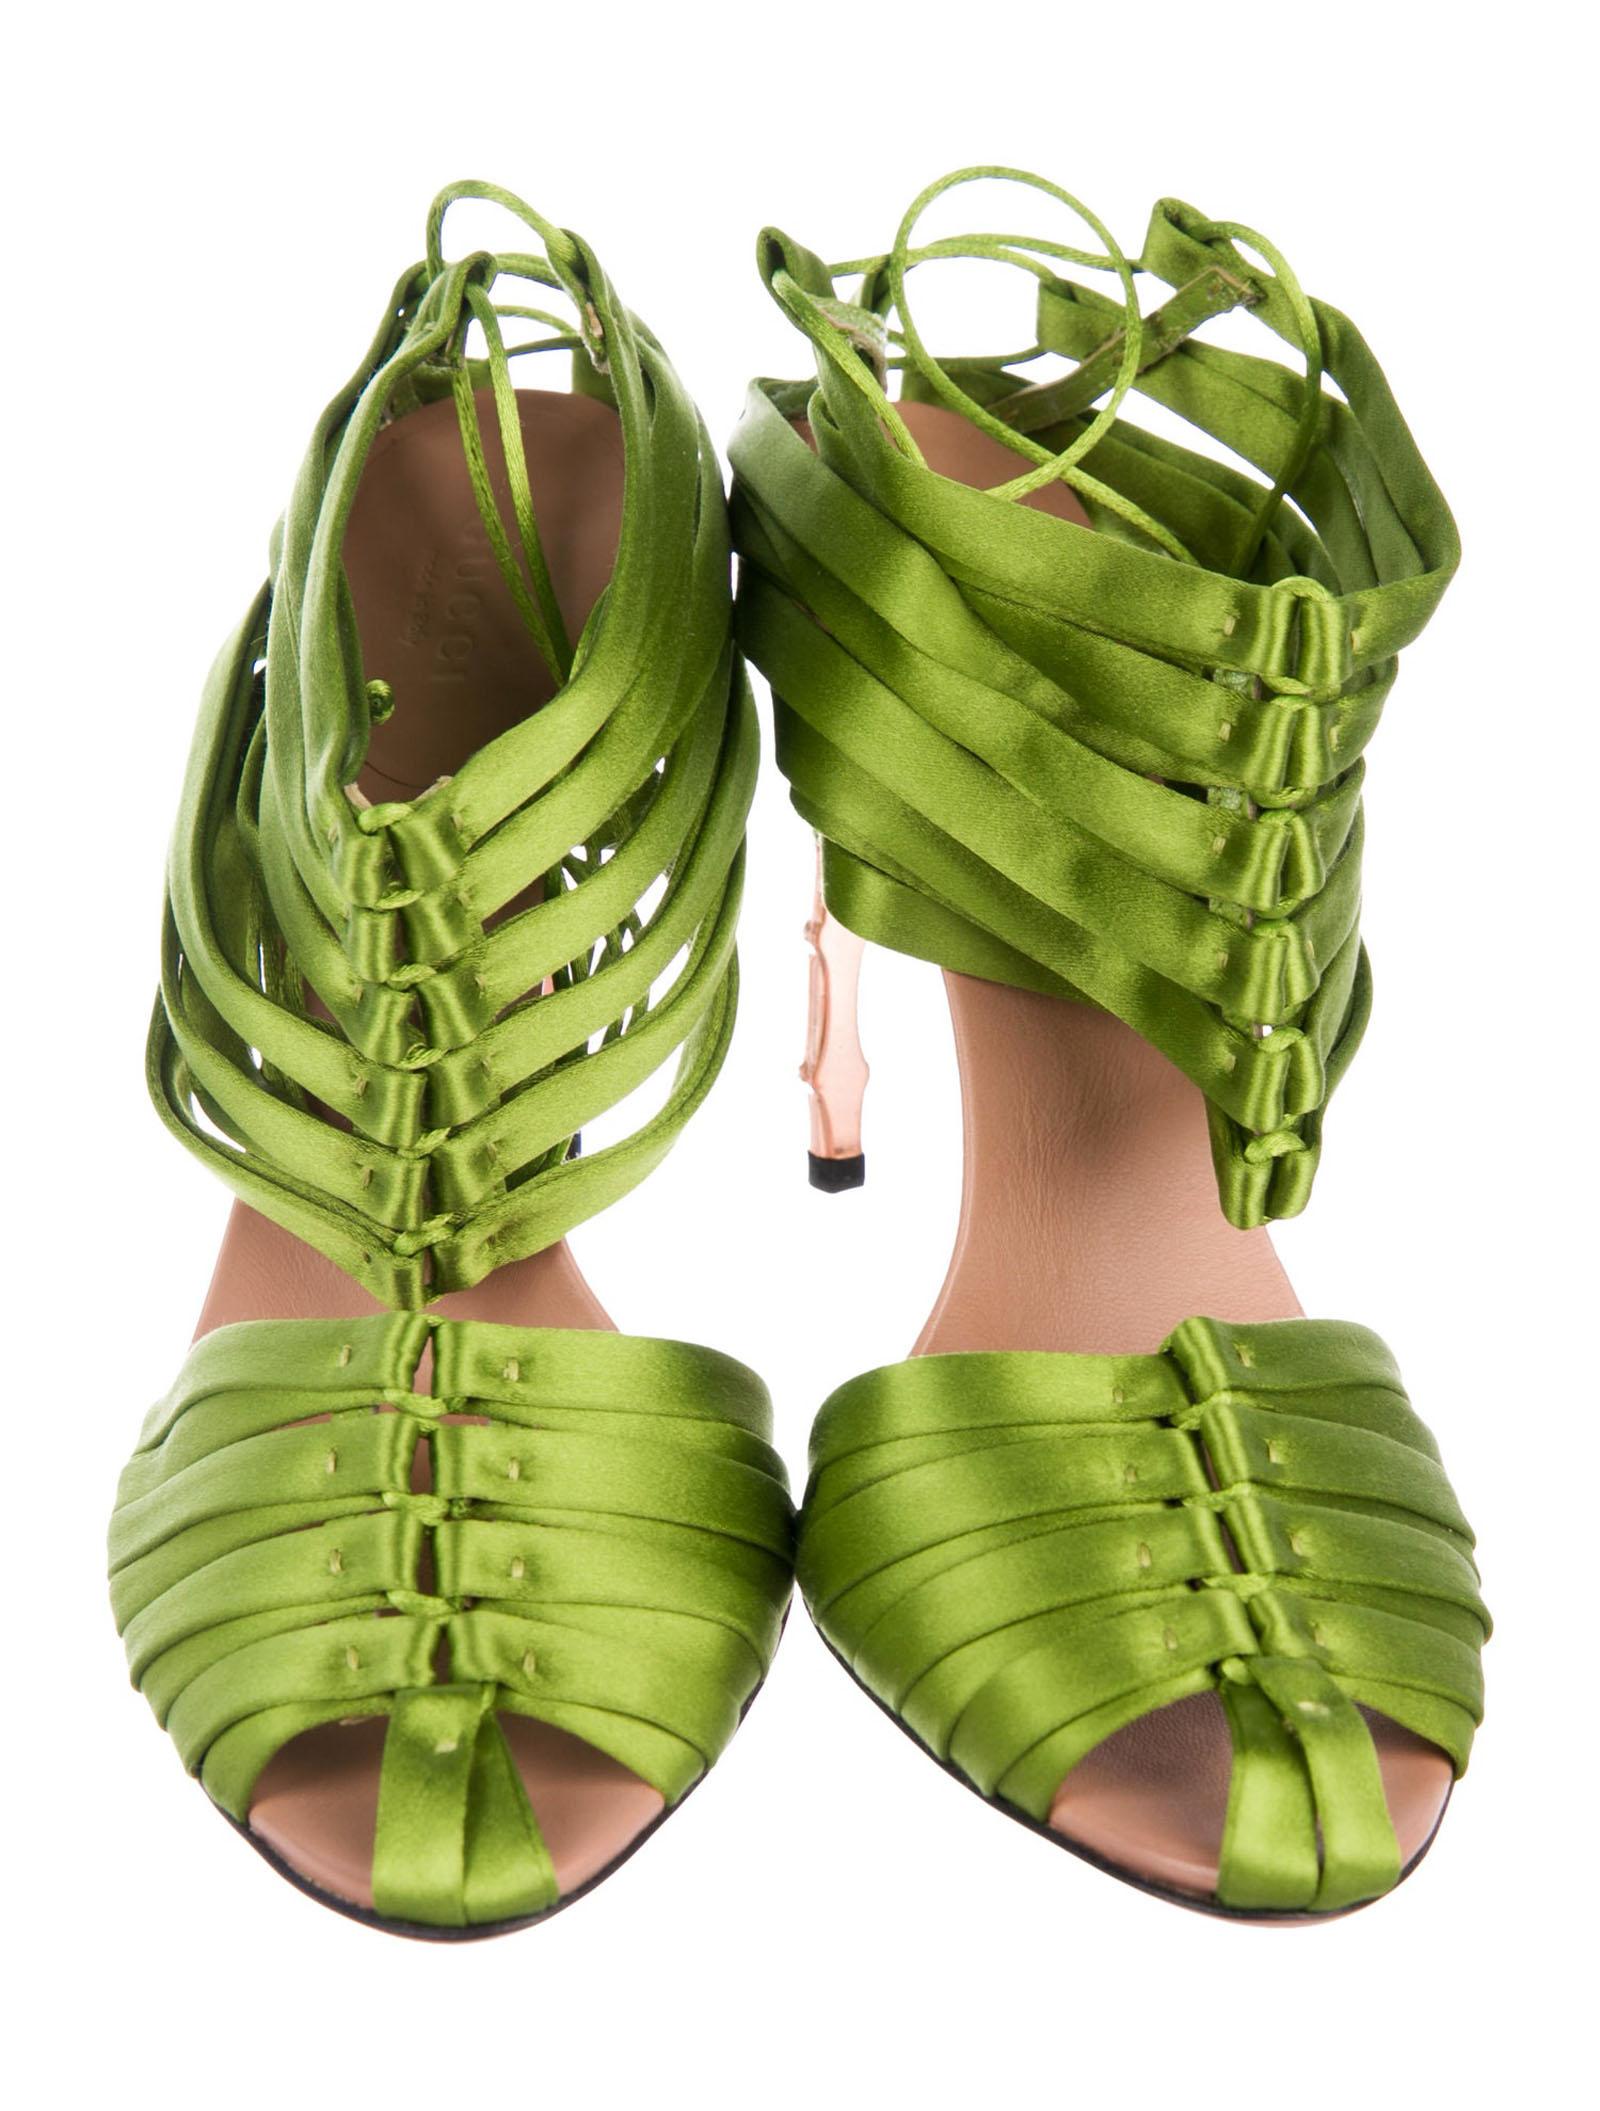 Nouveau TOM FORD for GUCCI S/S 2004 Green Satin Corset Shoes Sandals 9 B 1